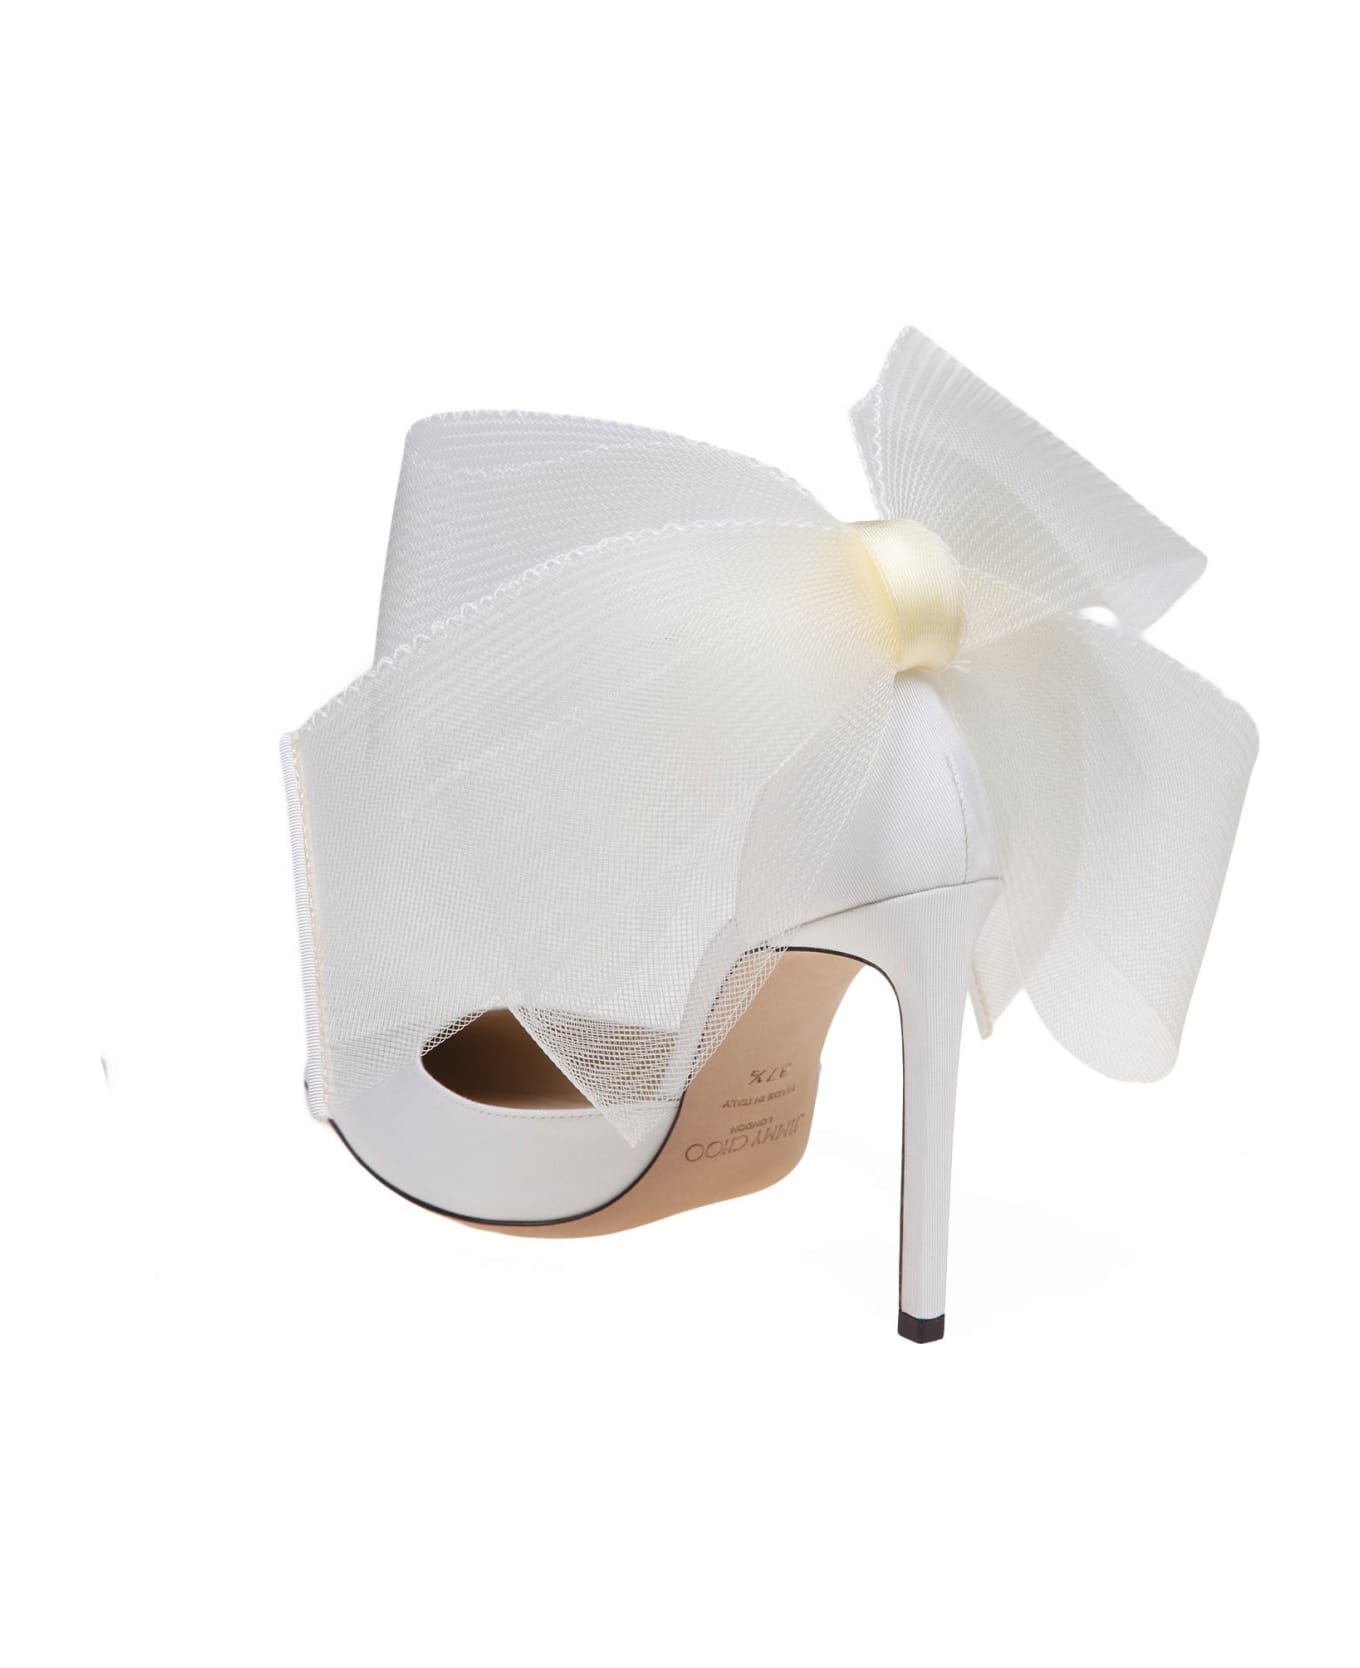 Jimmy Choo Pump Averly In Fabric With Bow - Milk